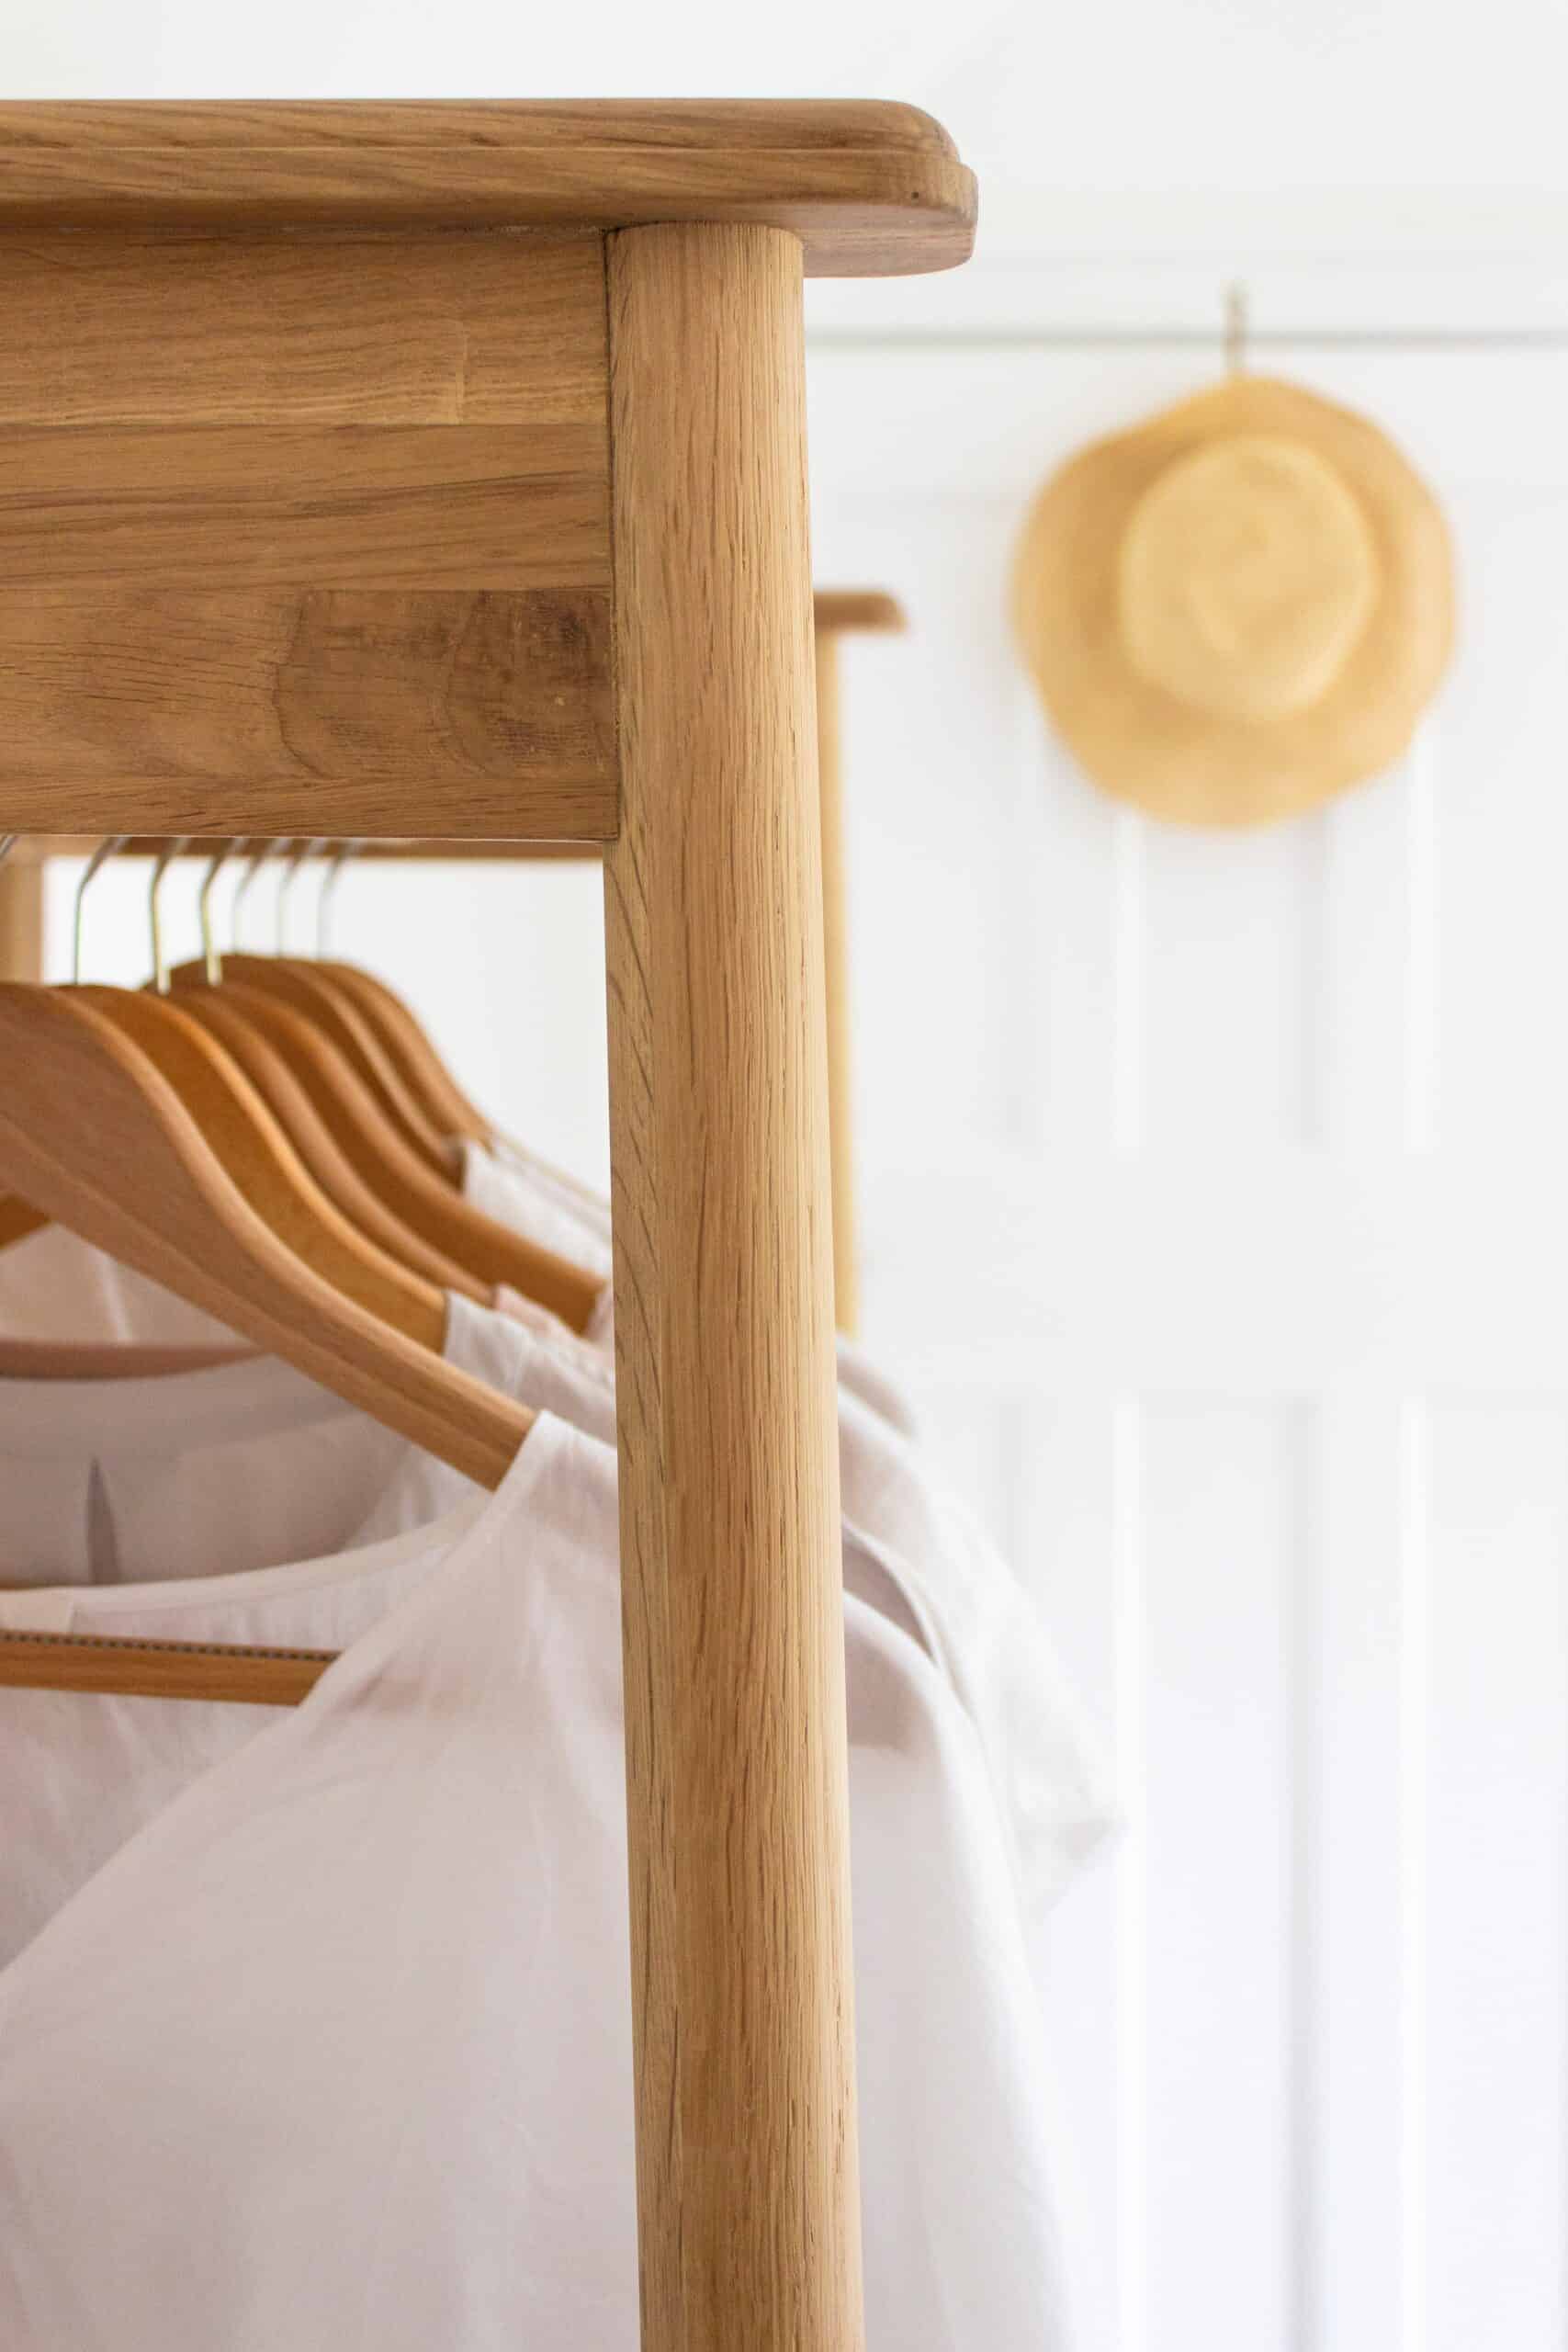 Linen shirts hanging from a wooden clothing rack.